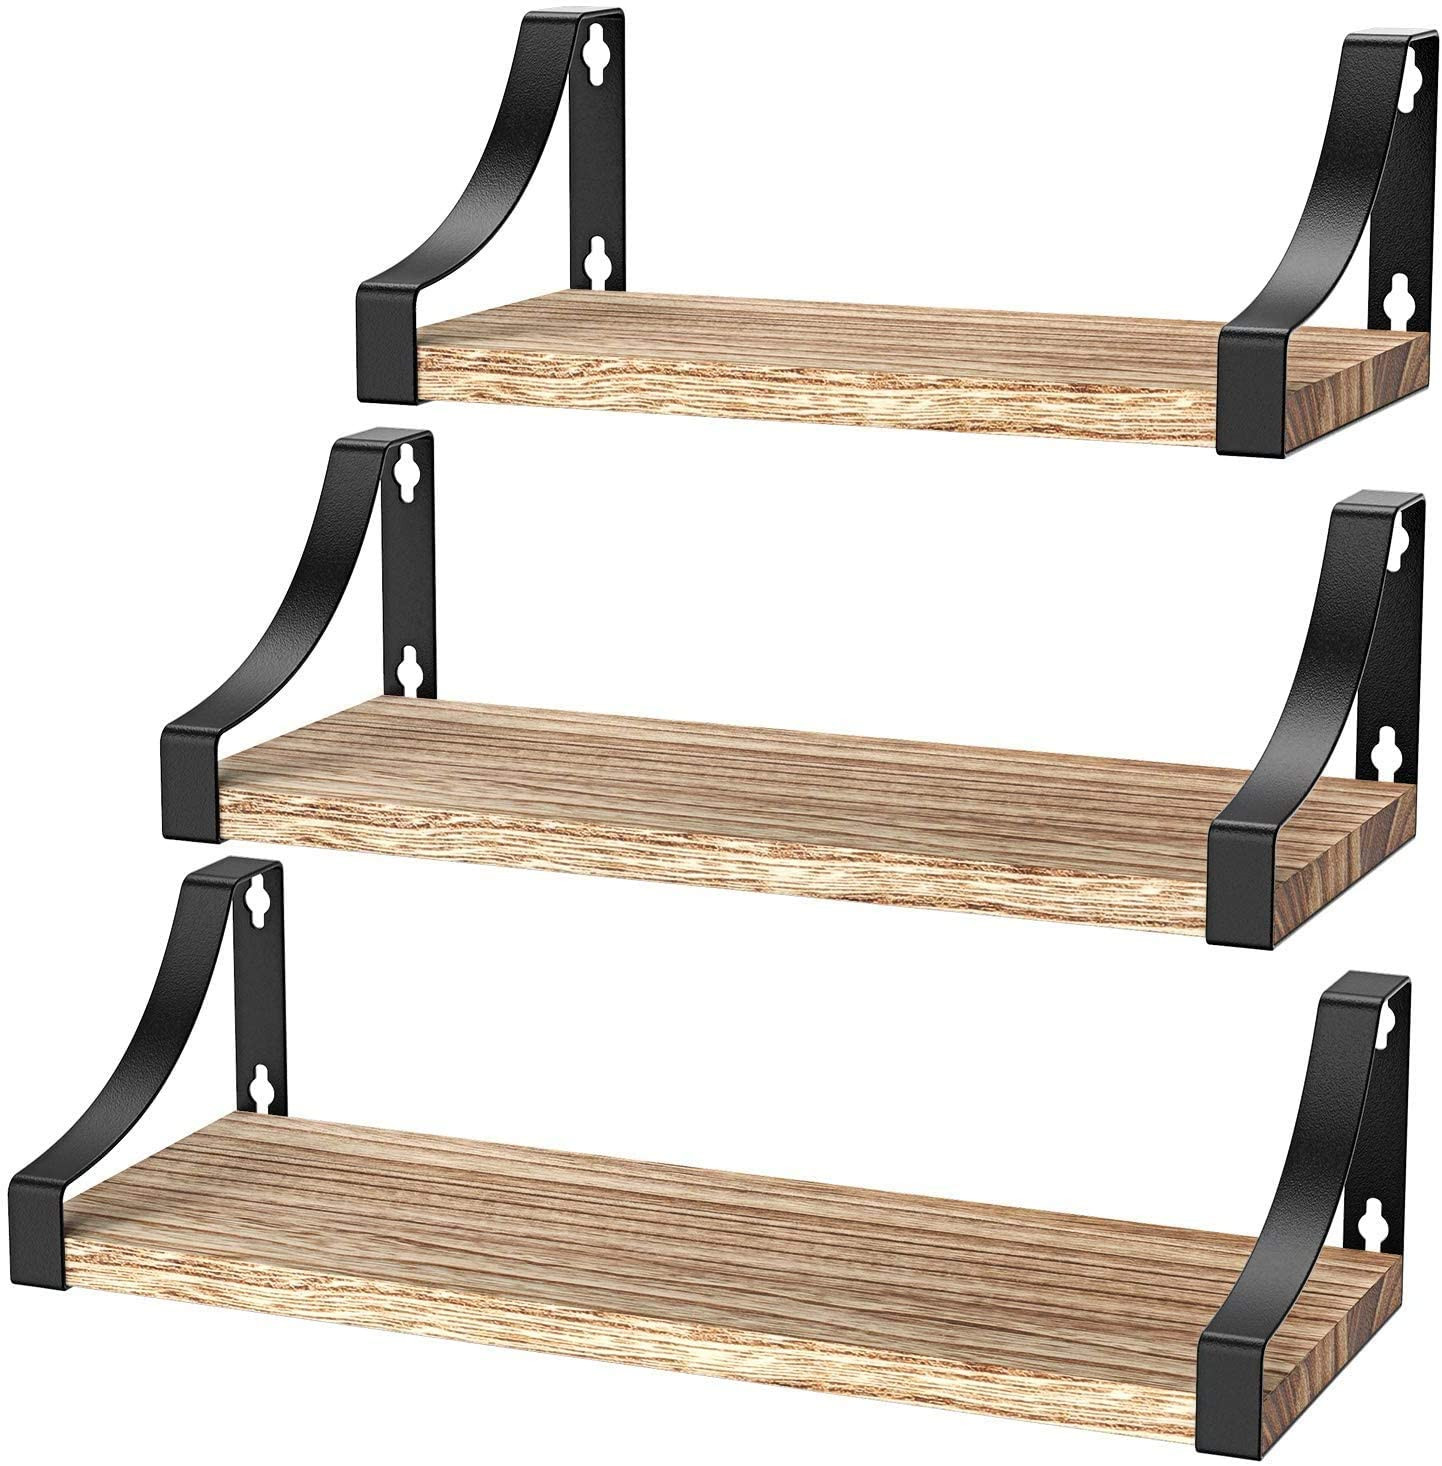 Rustic Paulownia Wood Wall Shelves for Bedroom, Bathroom, Living Room, Kitchen, Office